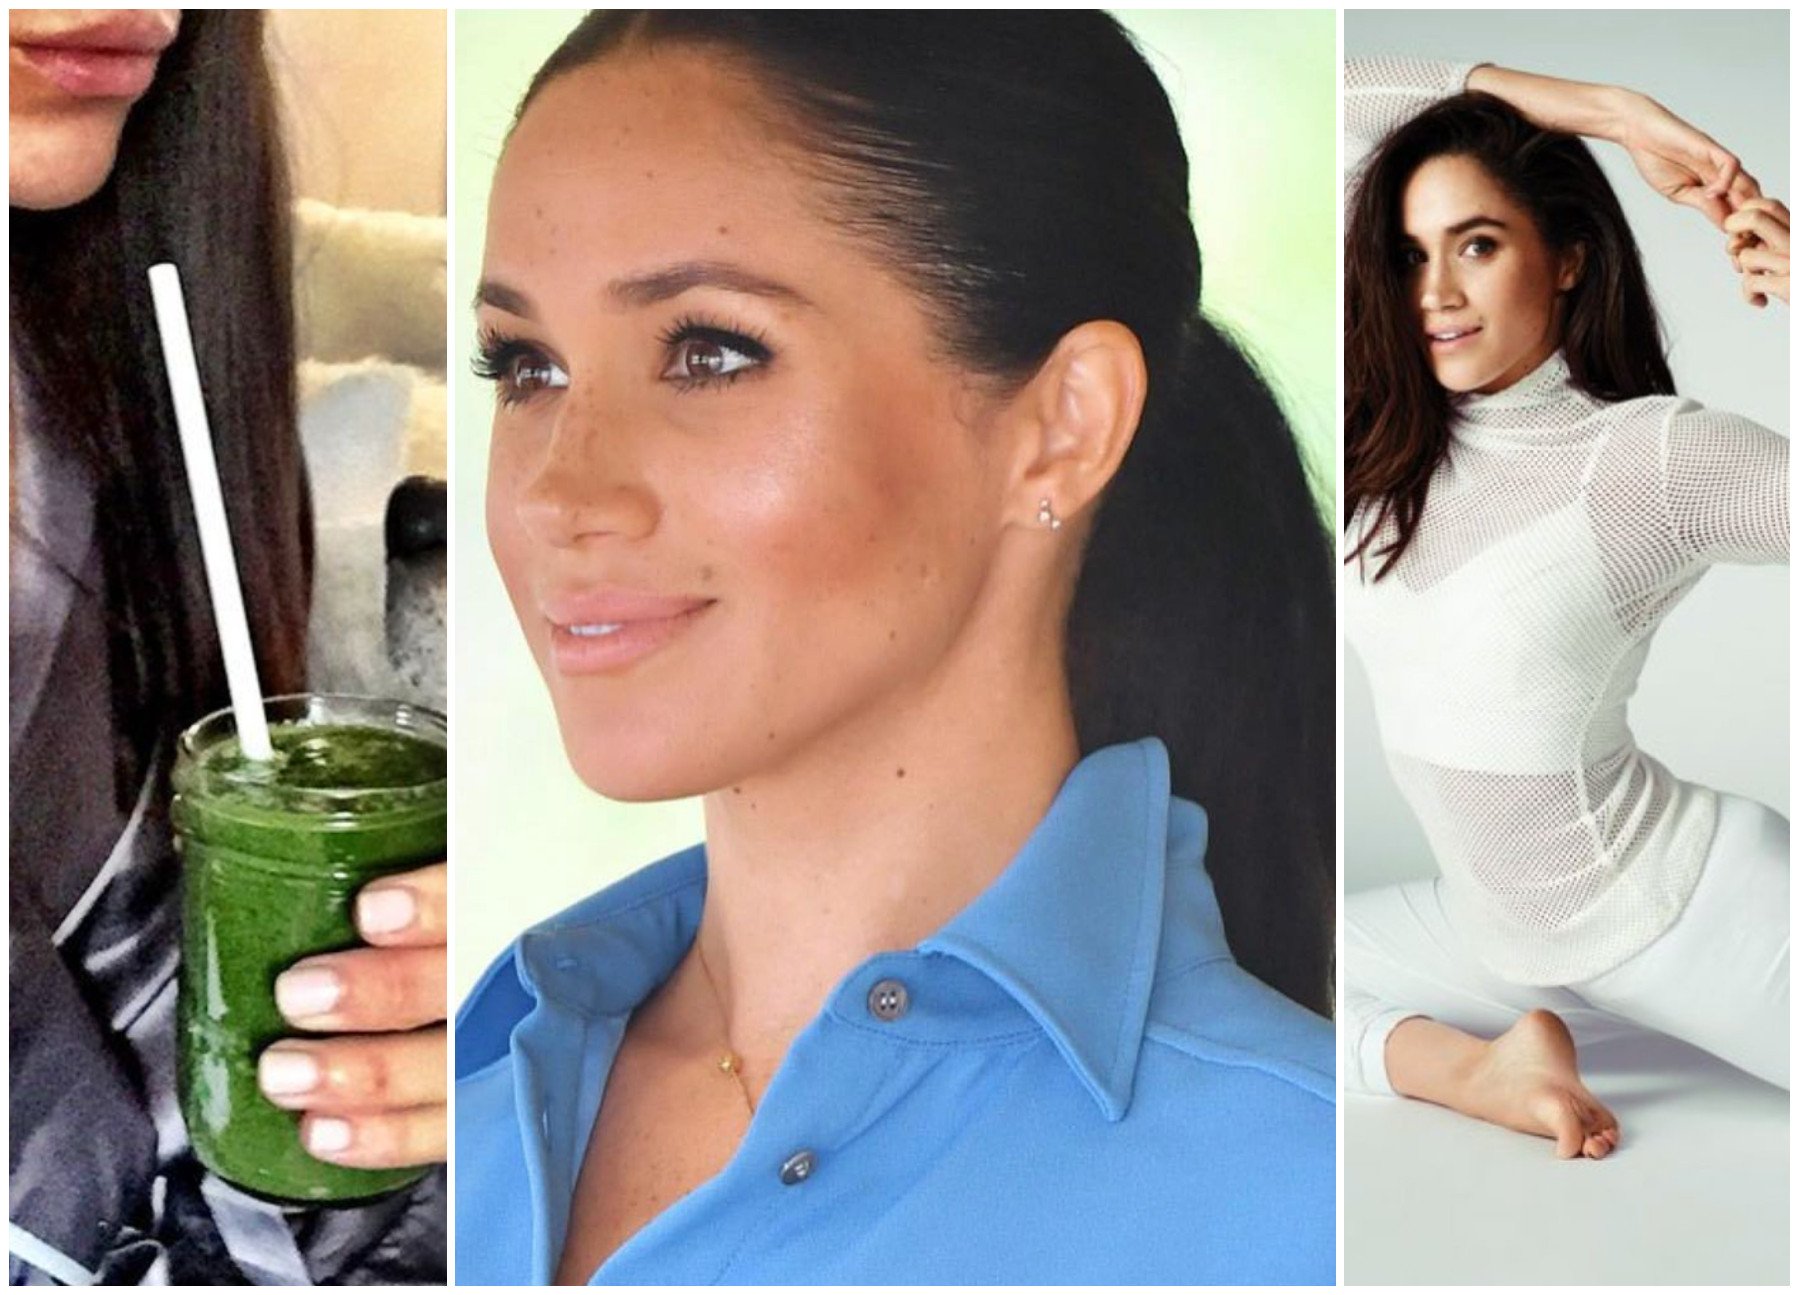 Meghan Markle's workout and wellness secrets: 9 ways the Duchess stays fit